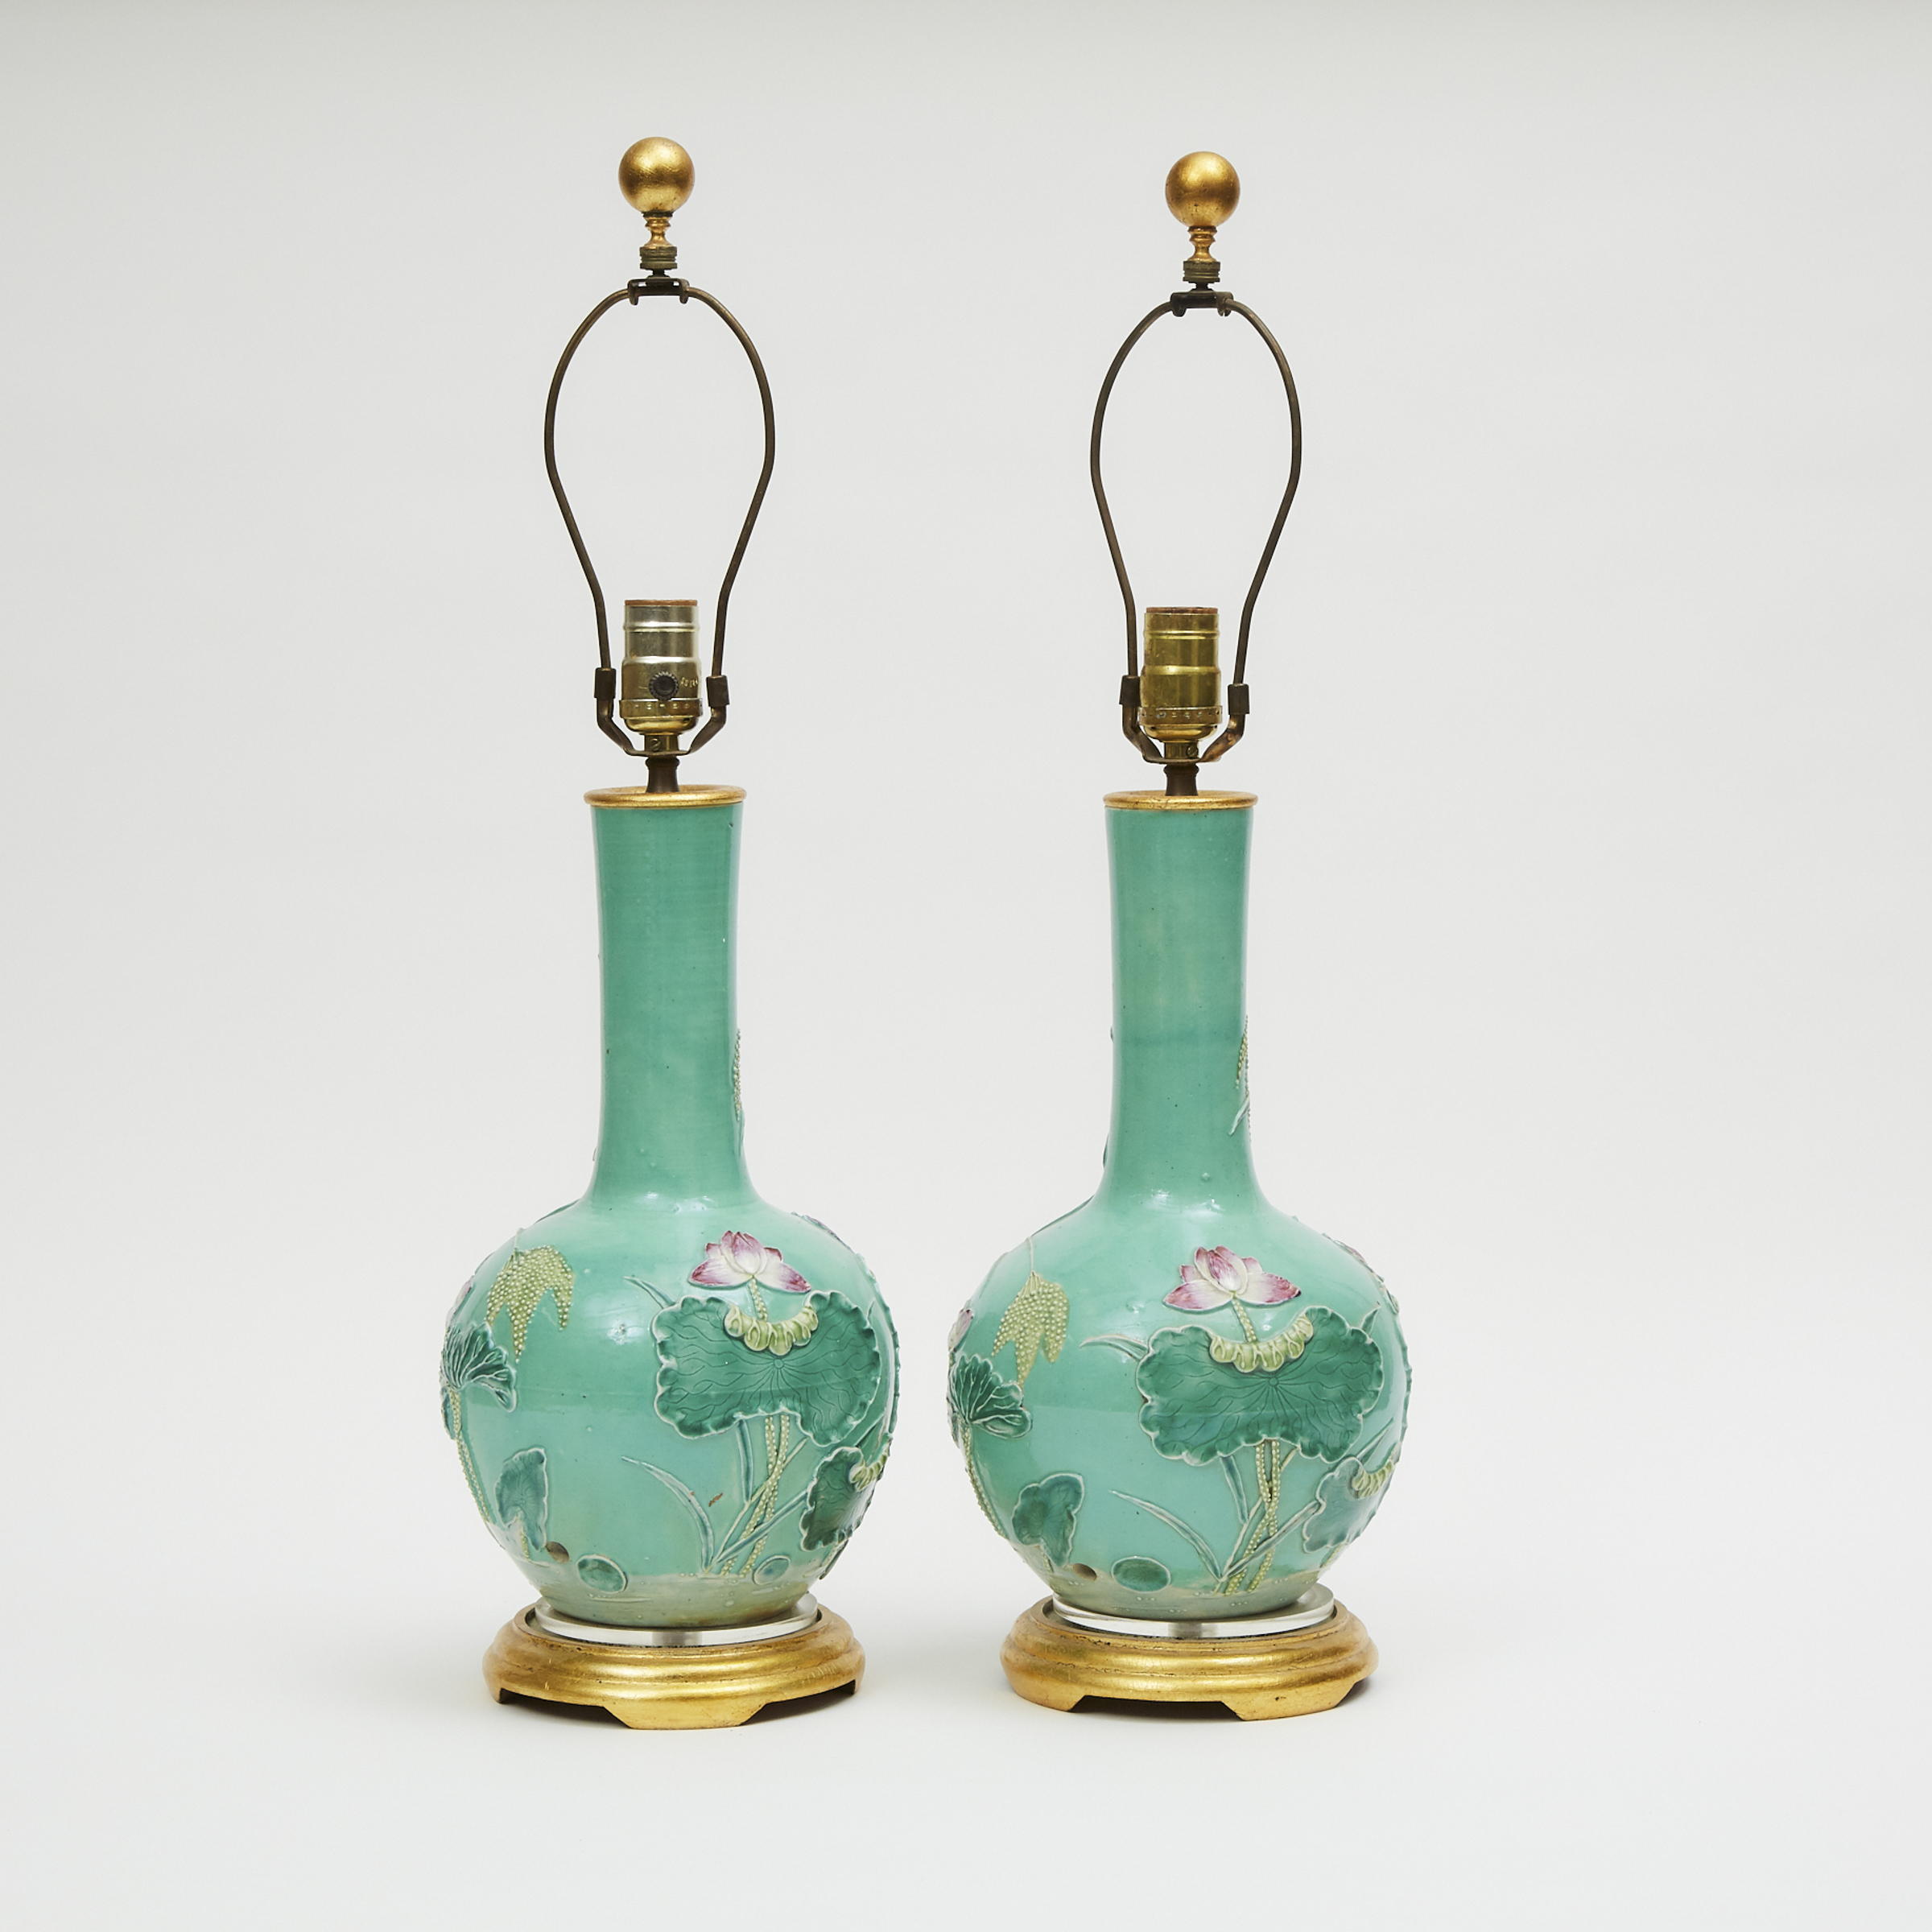 A Pair of Moulded Porcelain 'Cranes and Lotus' Vase Lamps